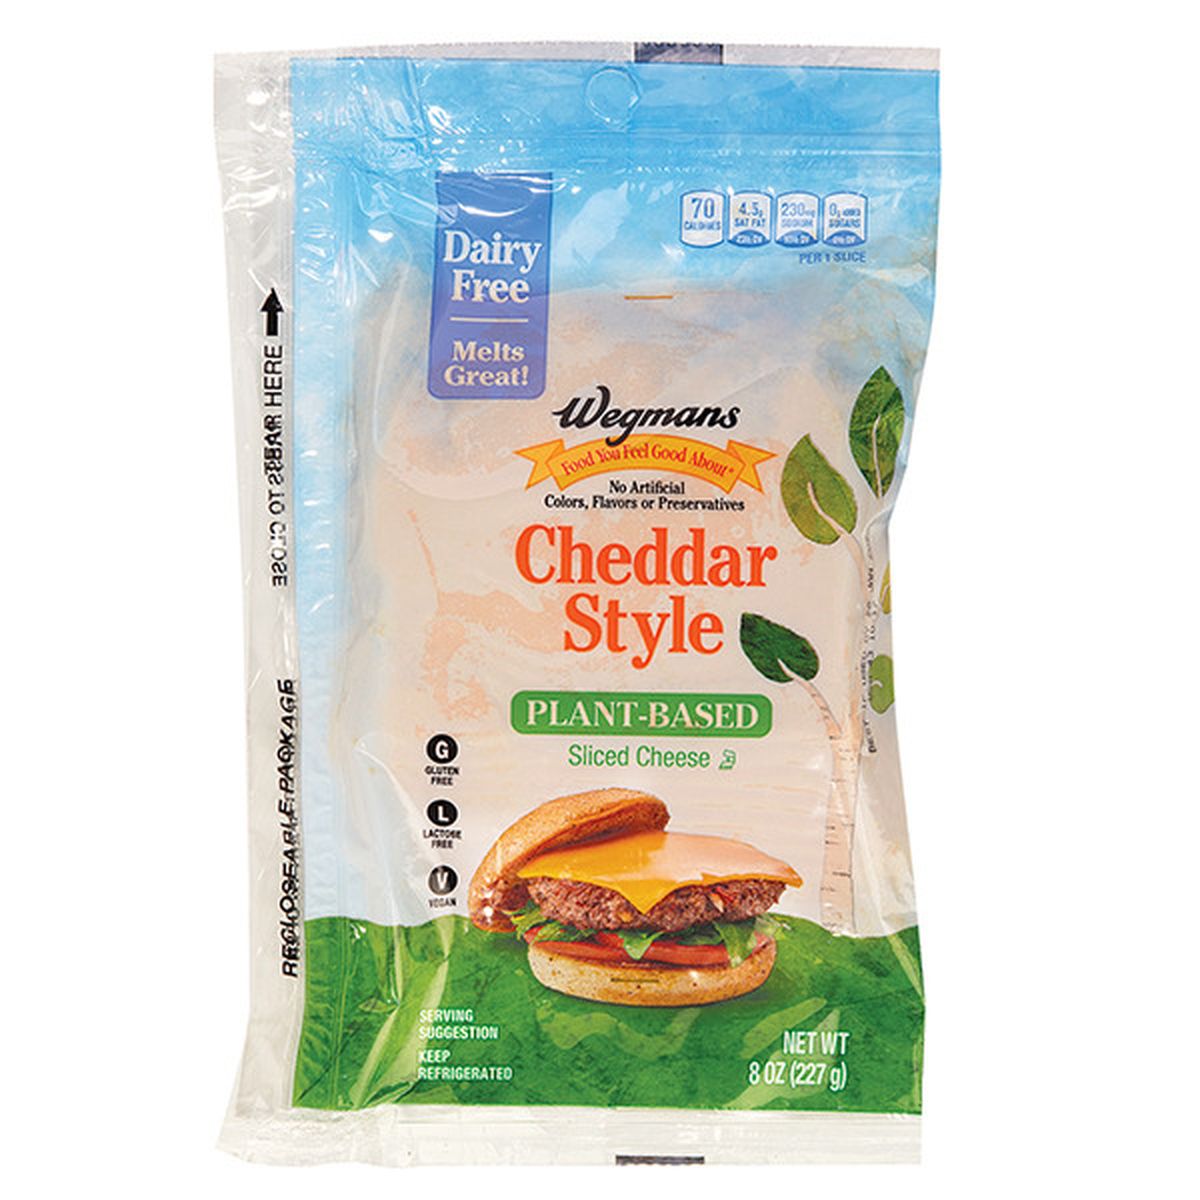 Calories in Wegmans Cheddar Style Plant-Based Sliced Cheese